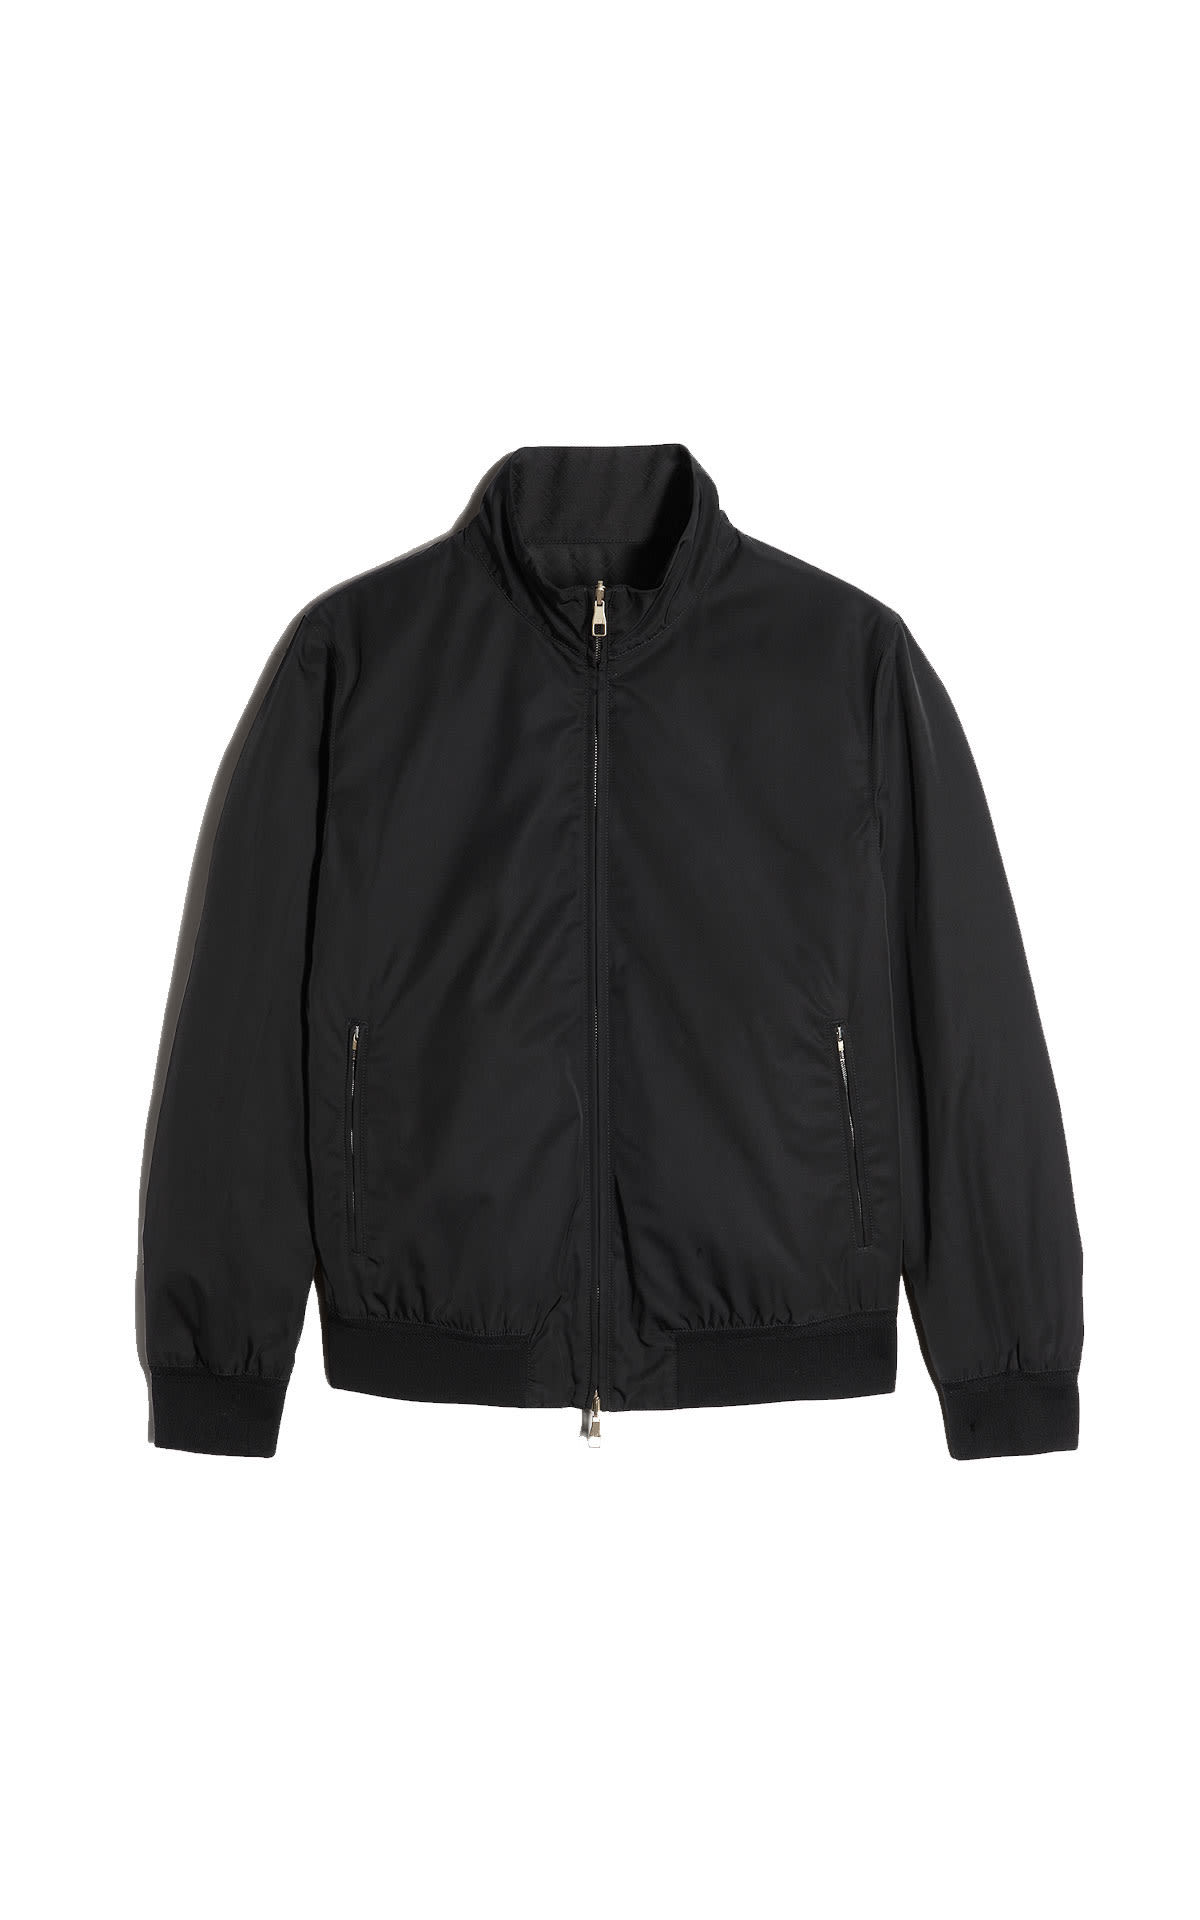 dunhill Signature reversible track jacket black from Bicester Village